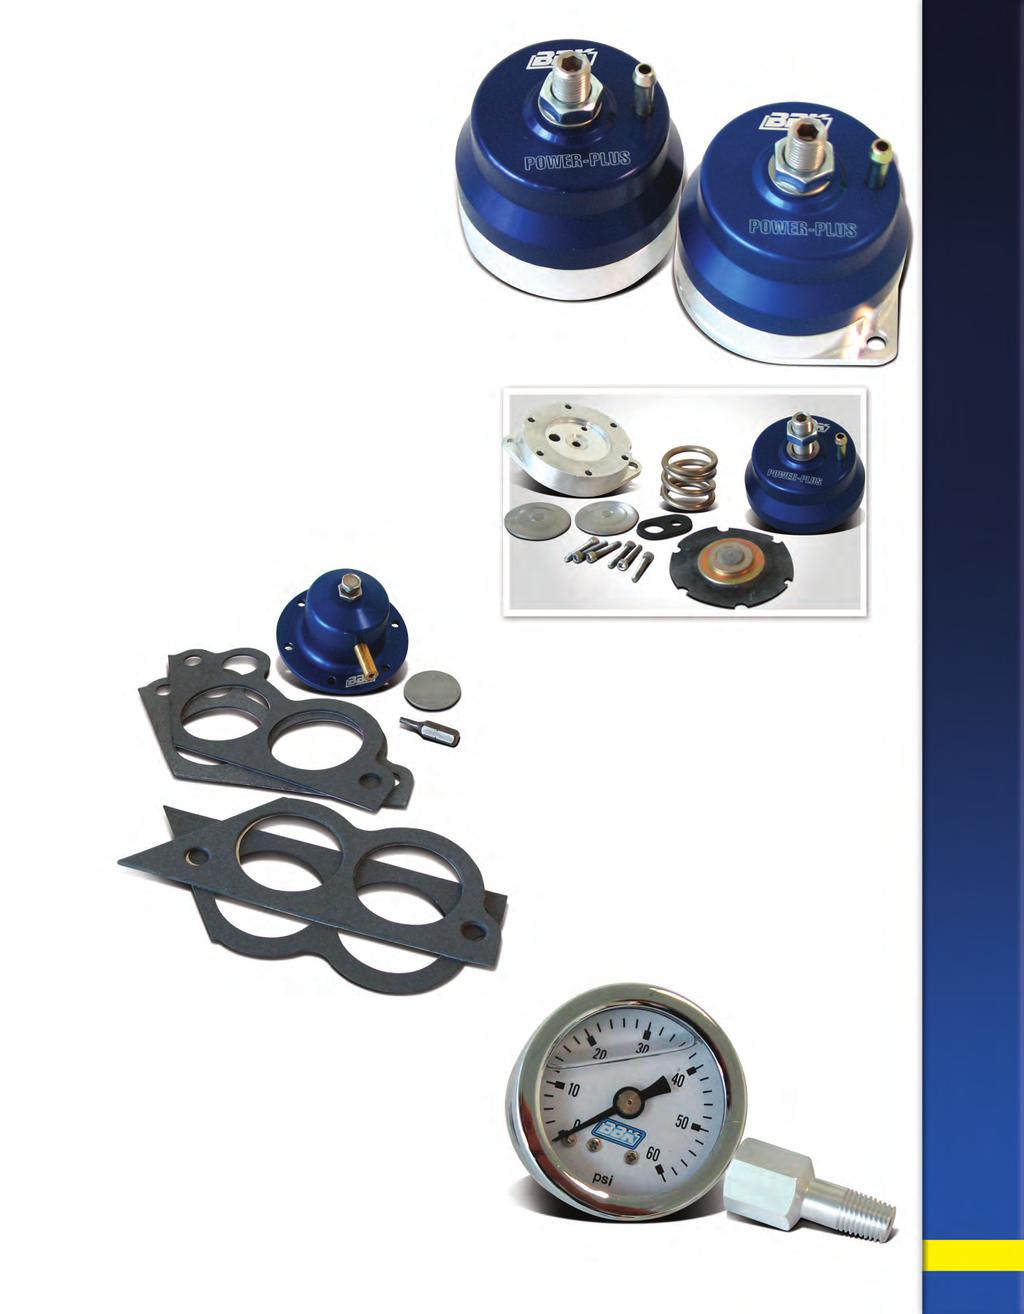 FORD ADJUSTABLE REGULATORS Our adjustable fuel pressure regulators have been a top choice with Ford enthusiasts for many years delivering unmatched value and quality. Available for both the 4.6L & 5.